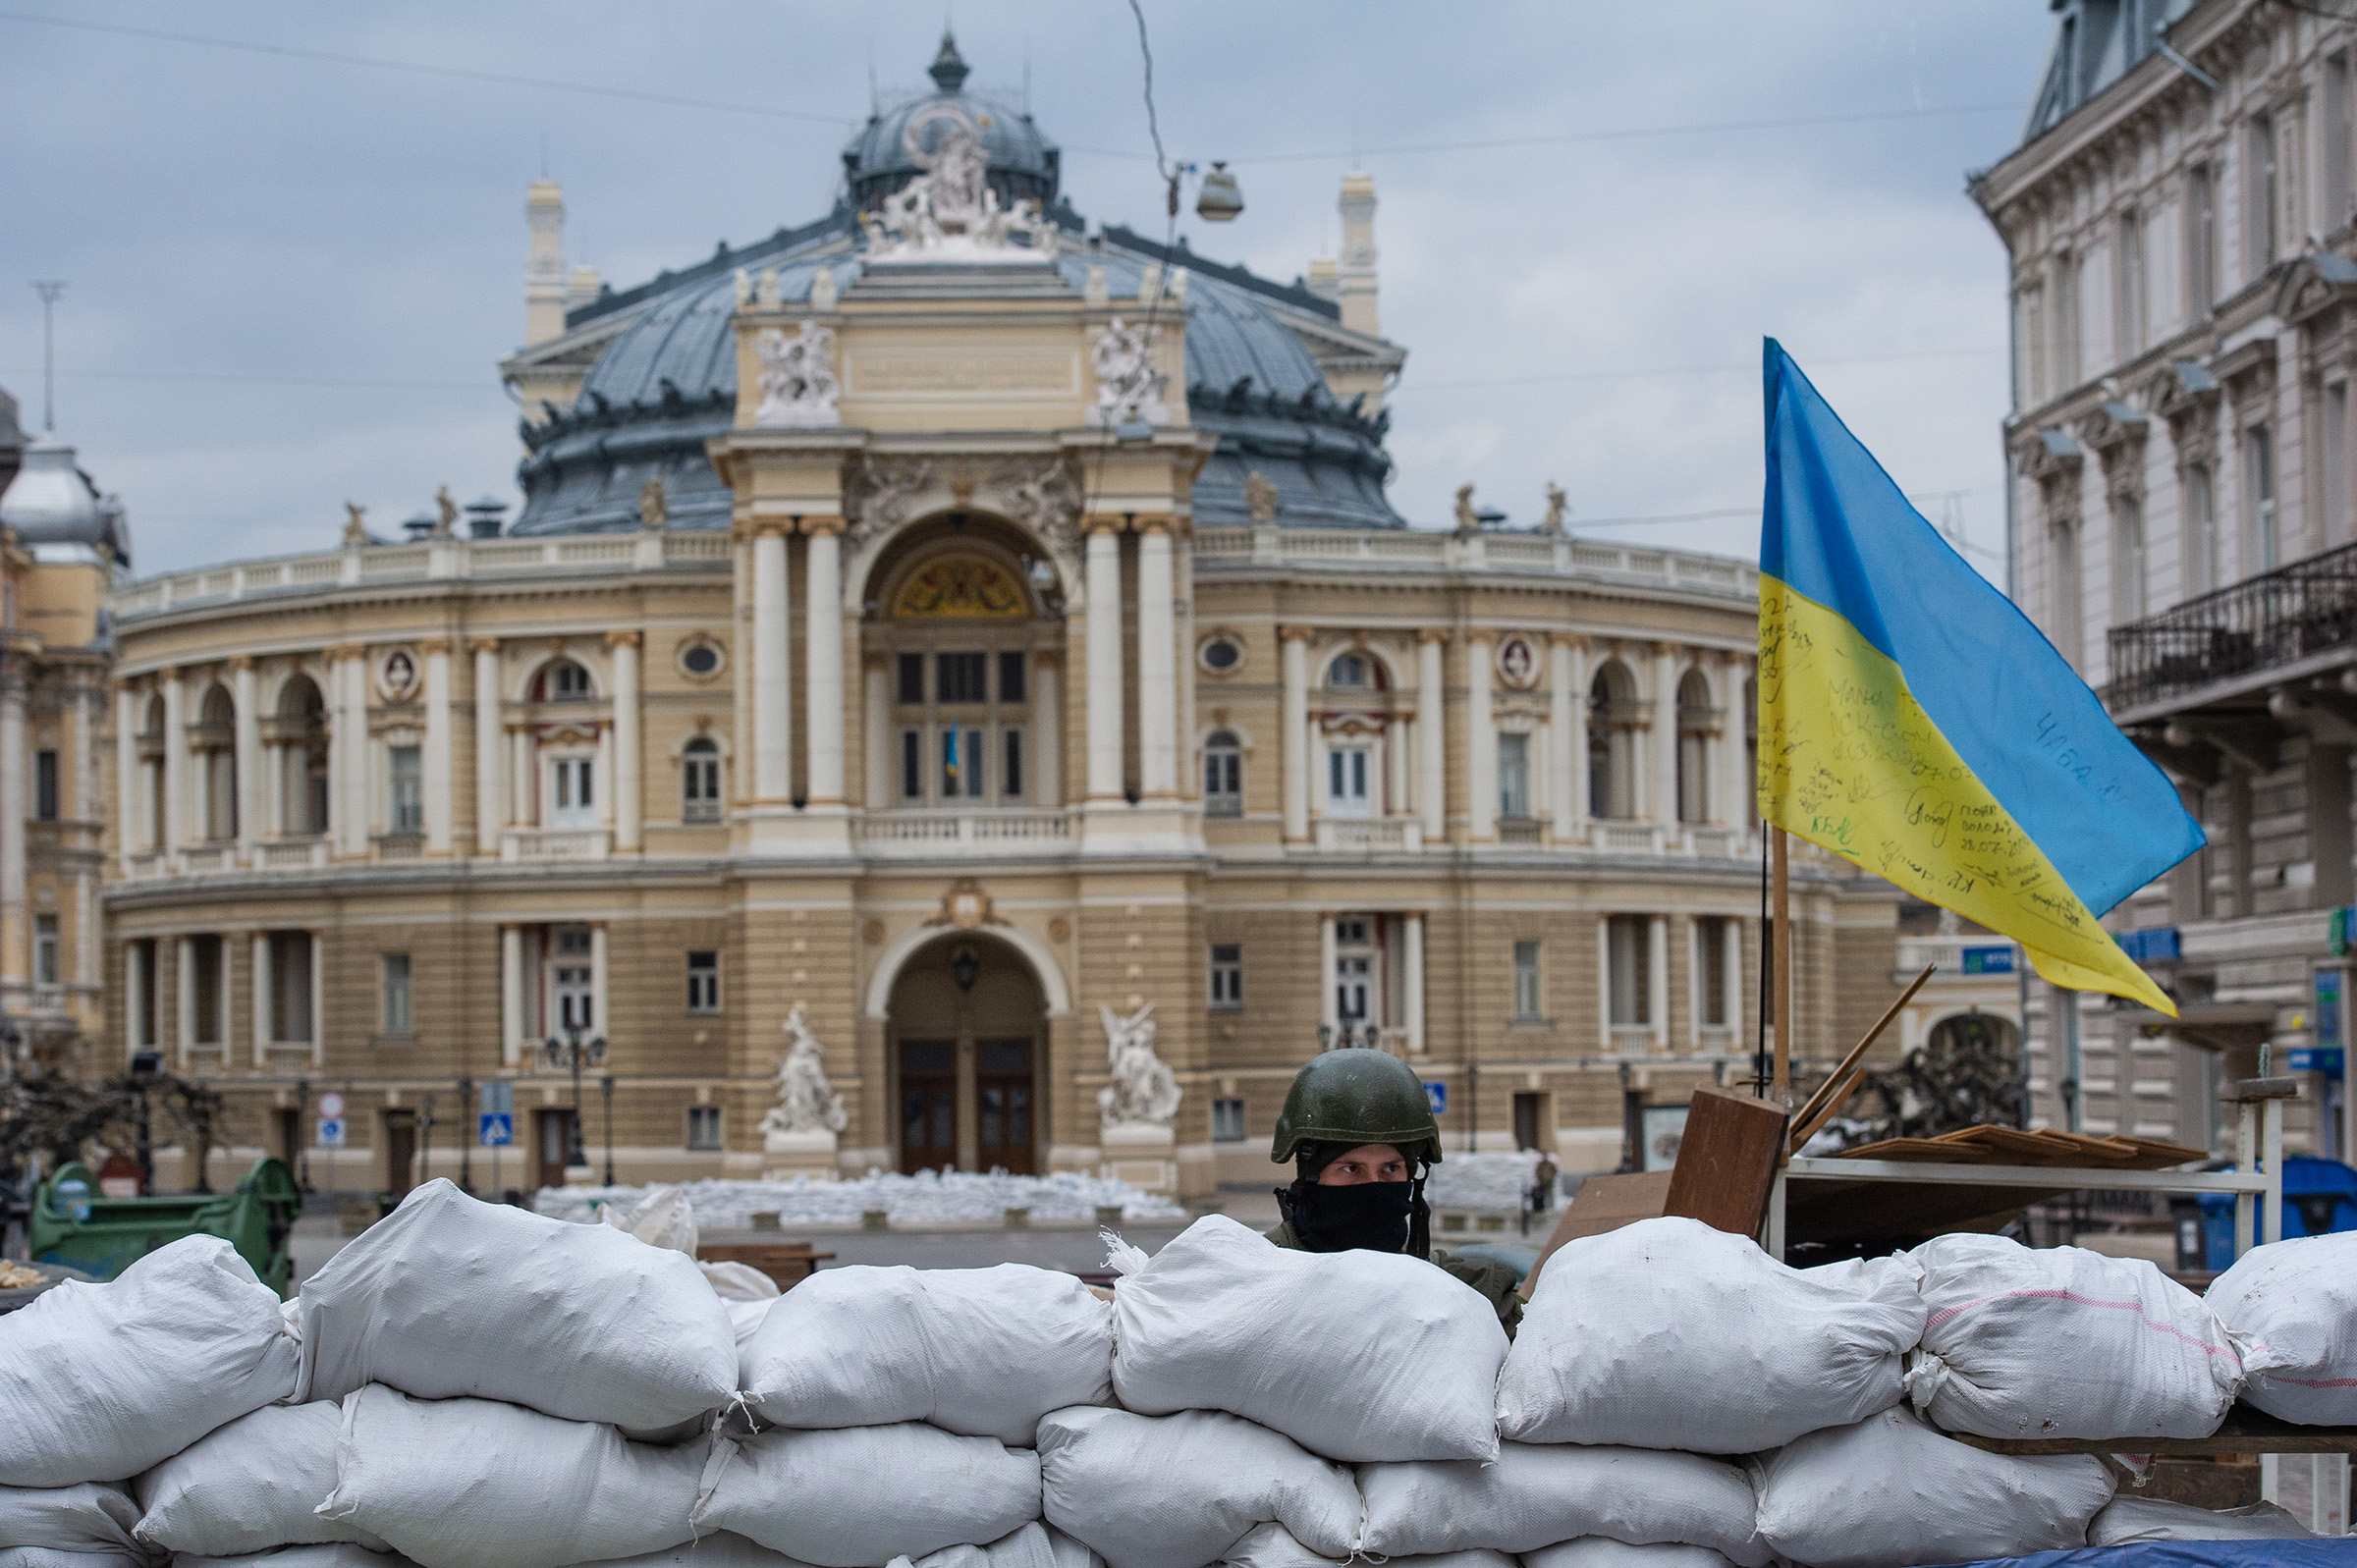 A soldier stands guard over the Odessa Opera and Ballet Theater.